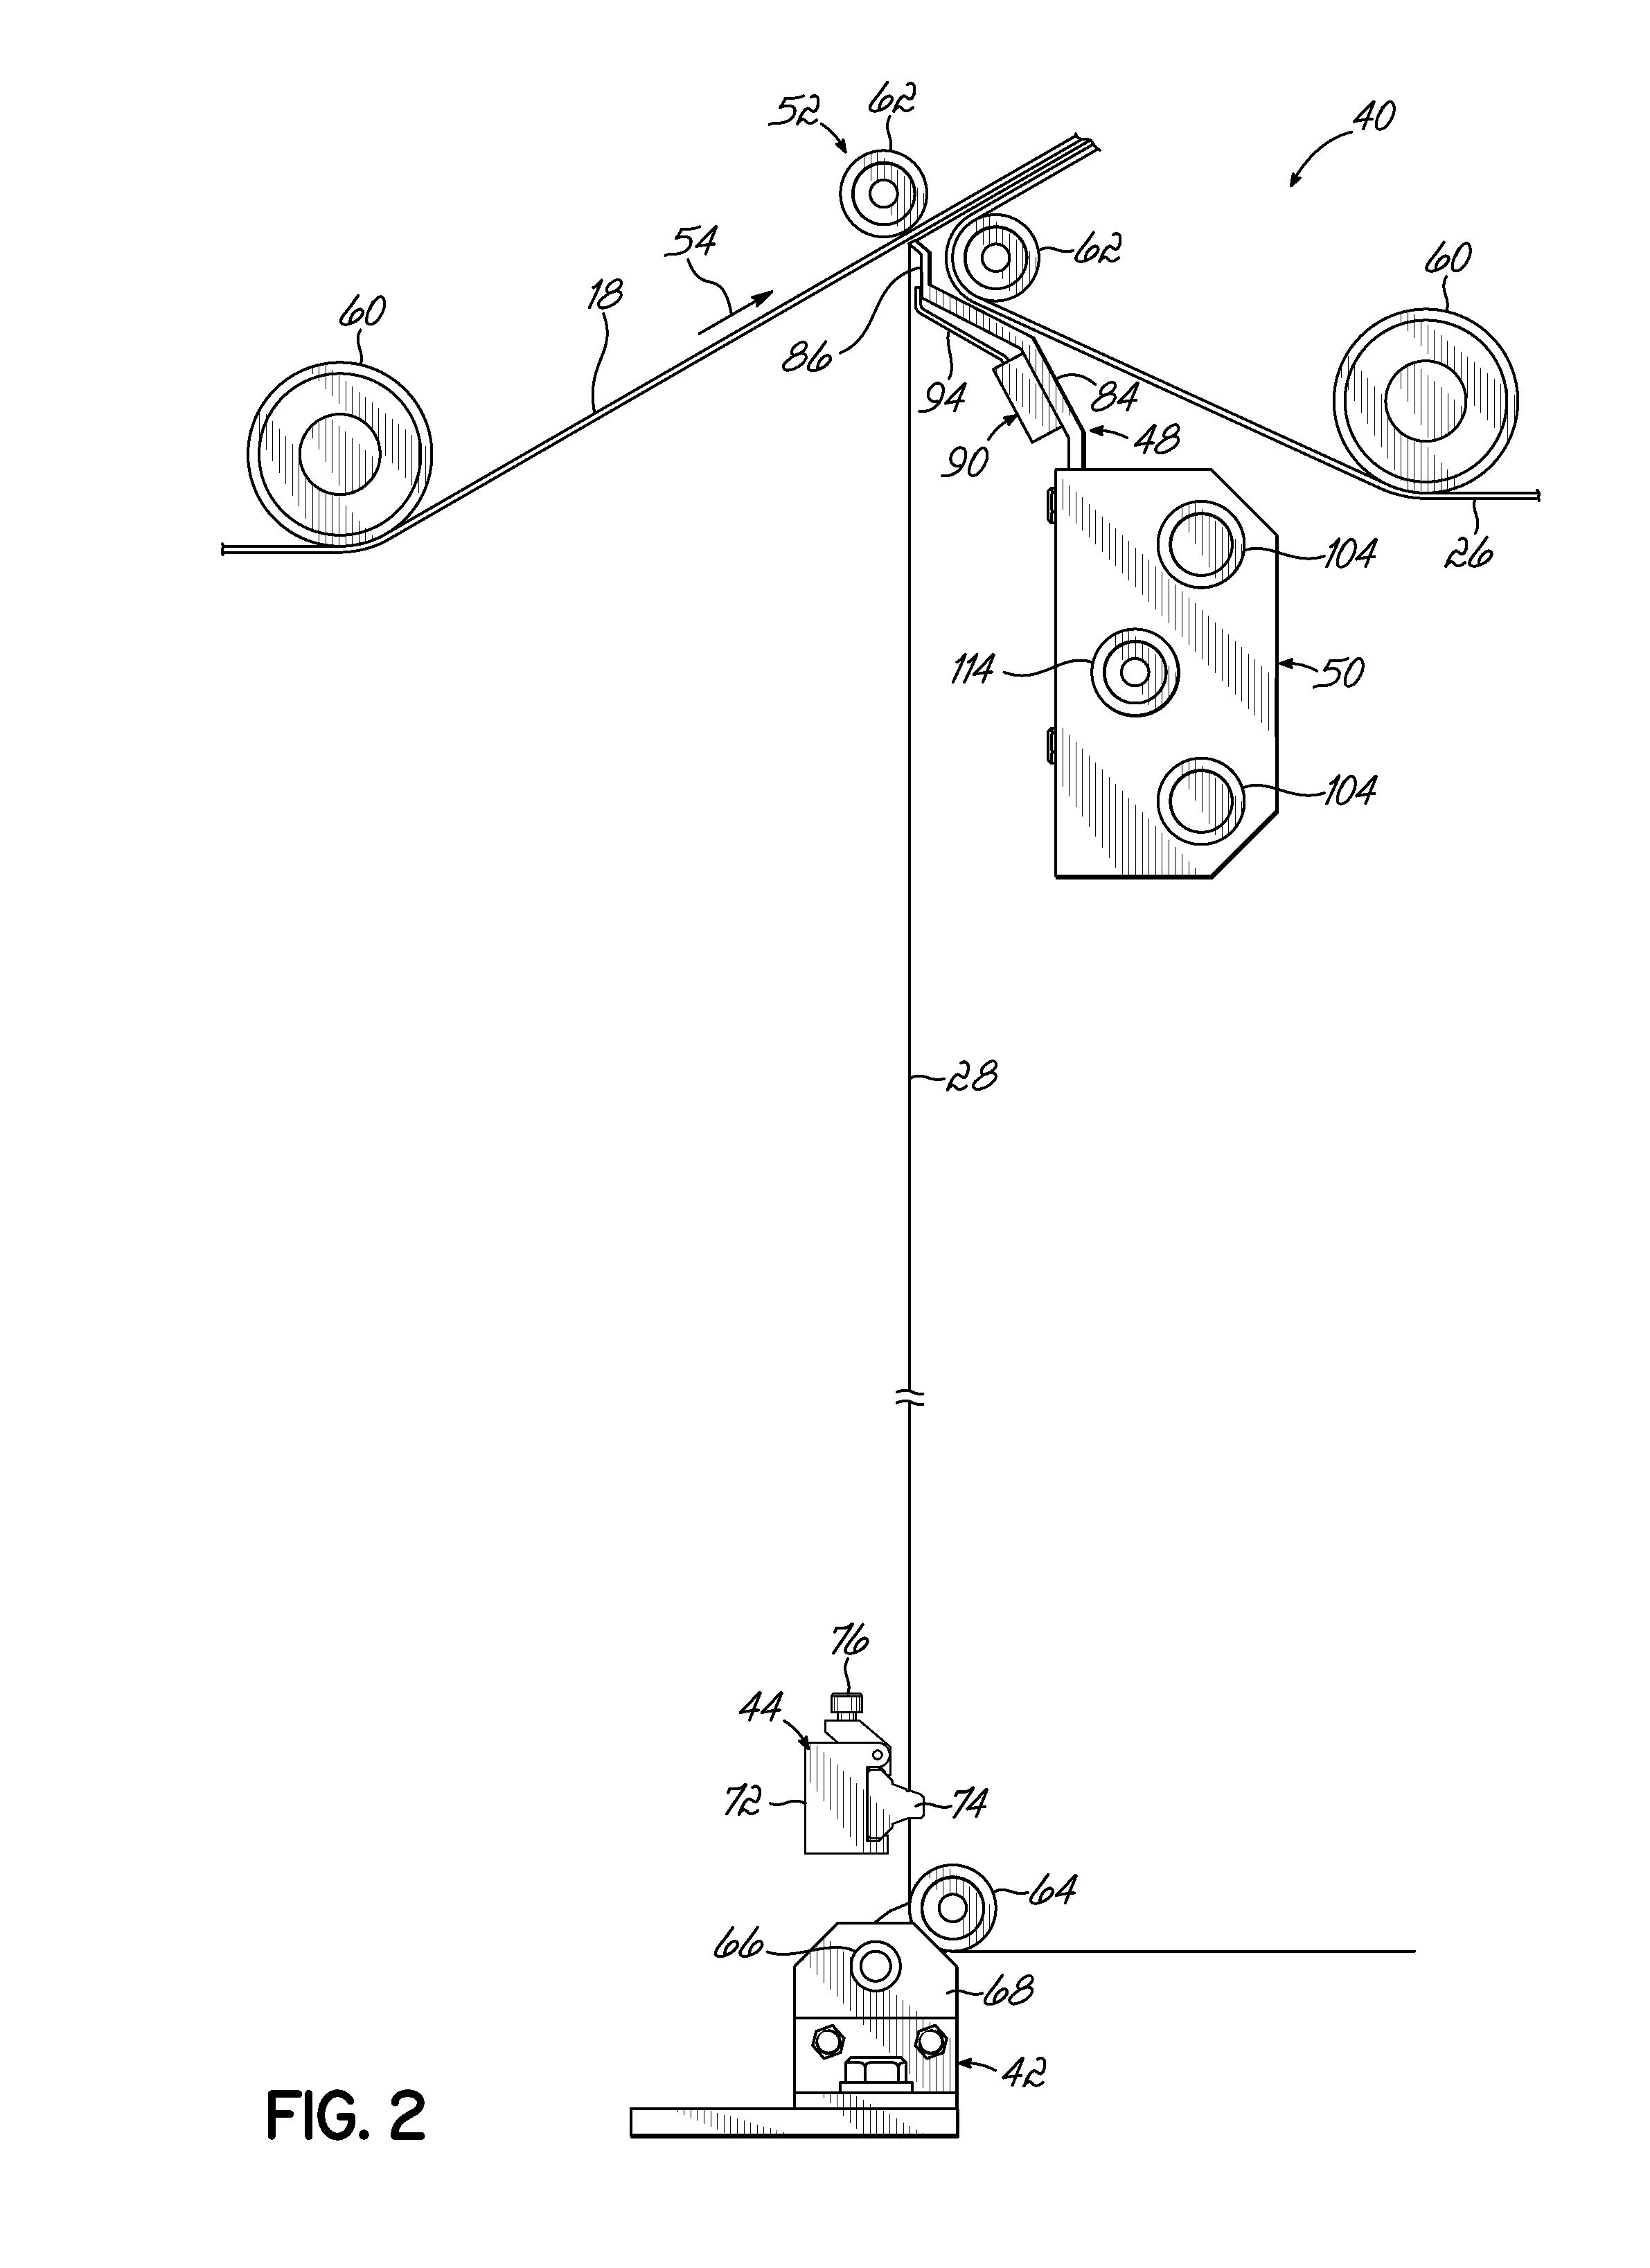 System and method for applying individually coated non-linear elastic strands to a substrate